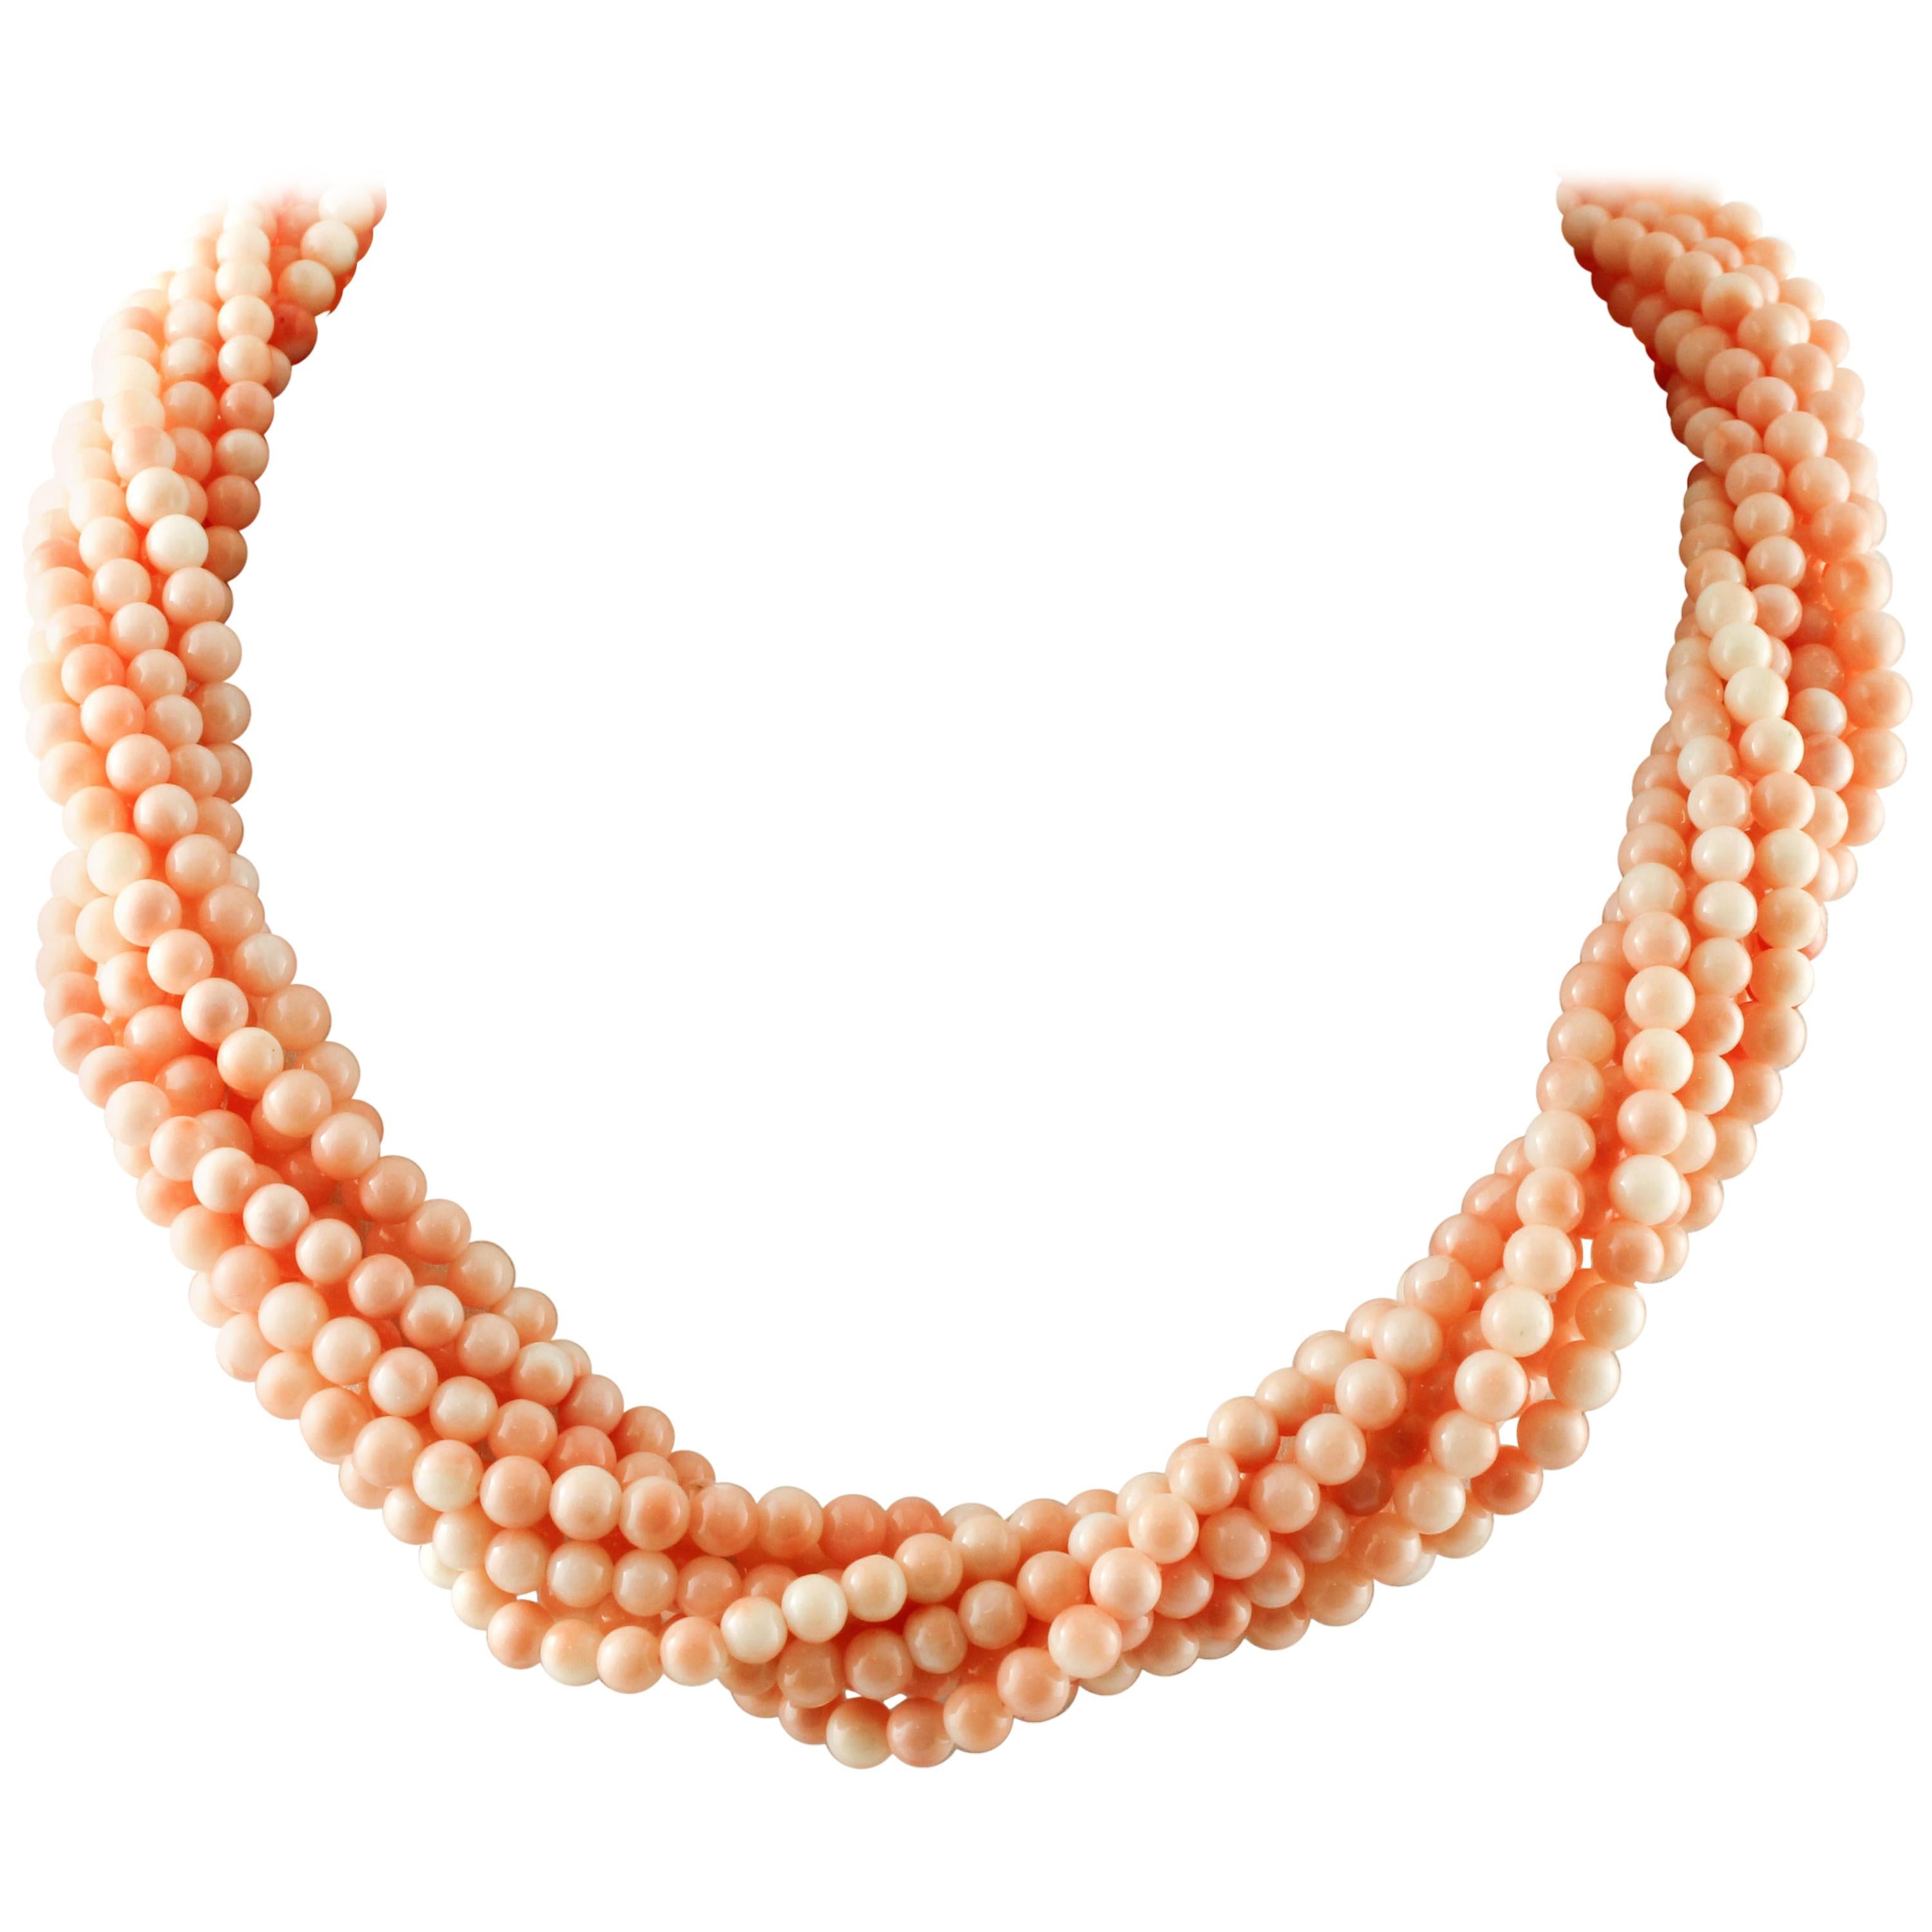 Intertwined Beaded Pink  Coral Spheres Necklace, 18K Yellow Gold Closure